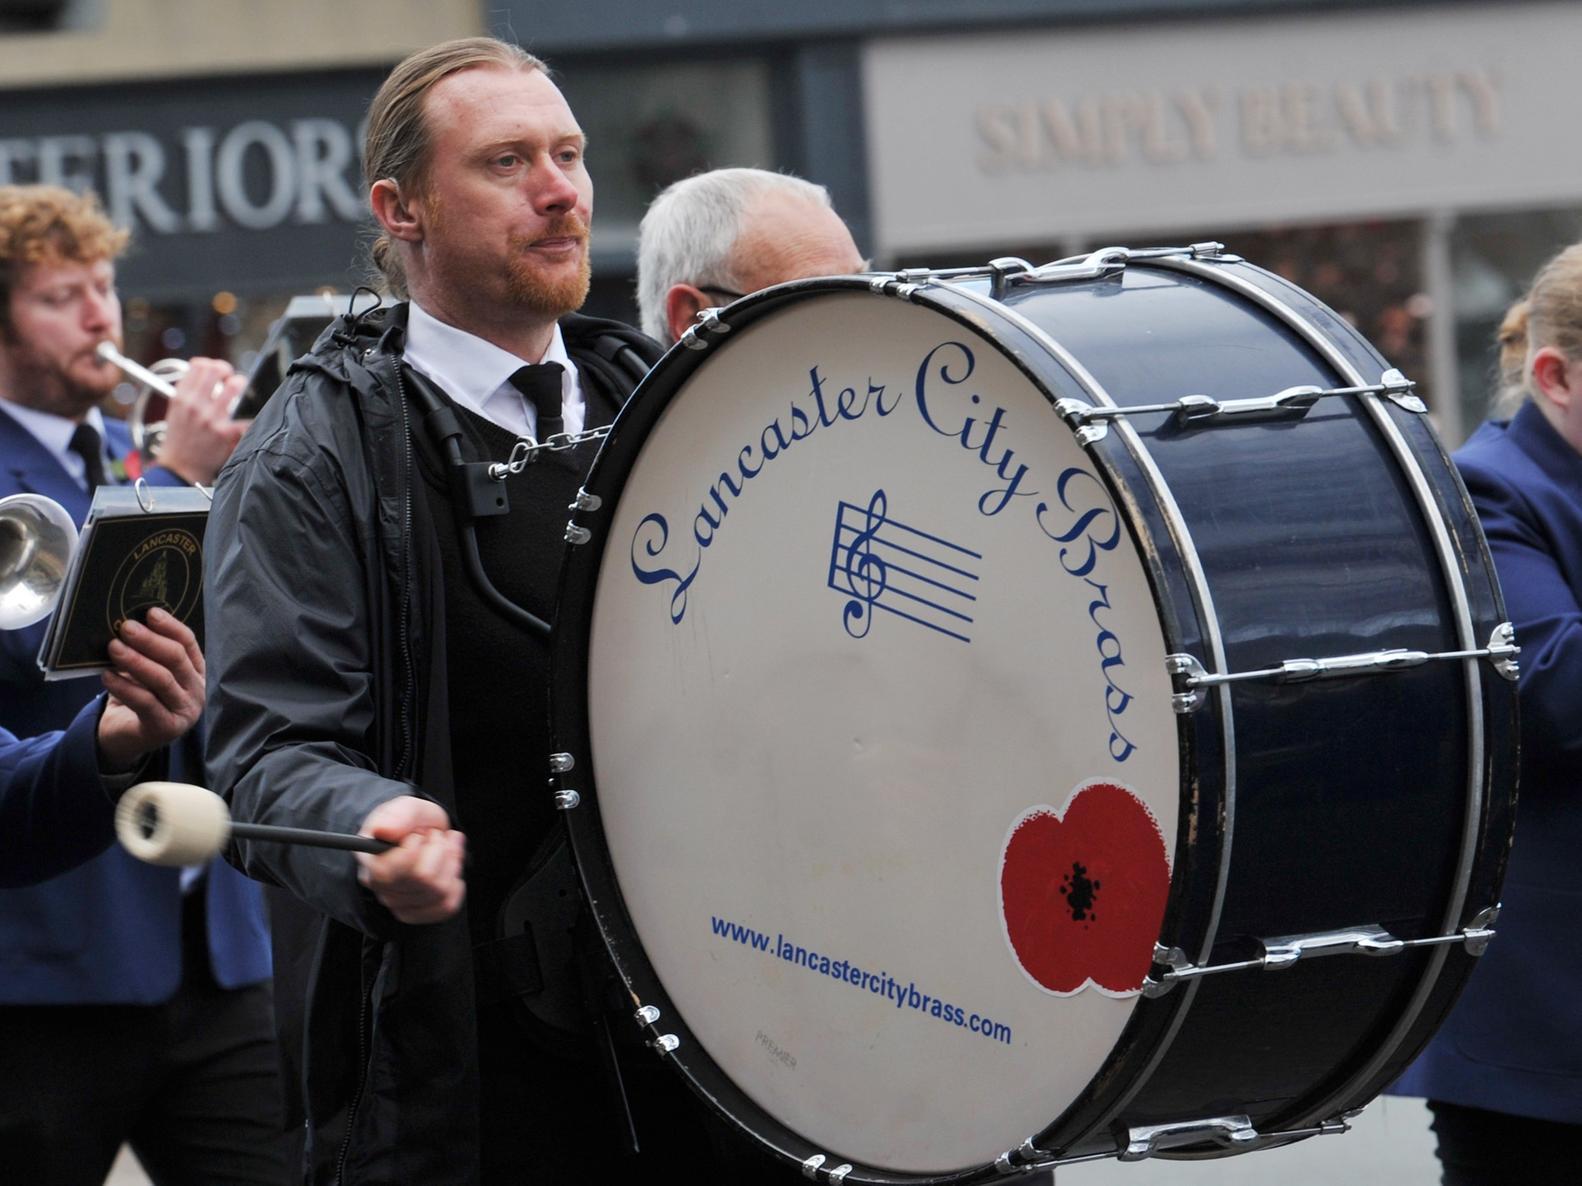 A parade past Lancaster Town Hall to end the annual Remembrance Day service and commemorations in Lancaster city centre. Photo by Michelle Adamson.